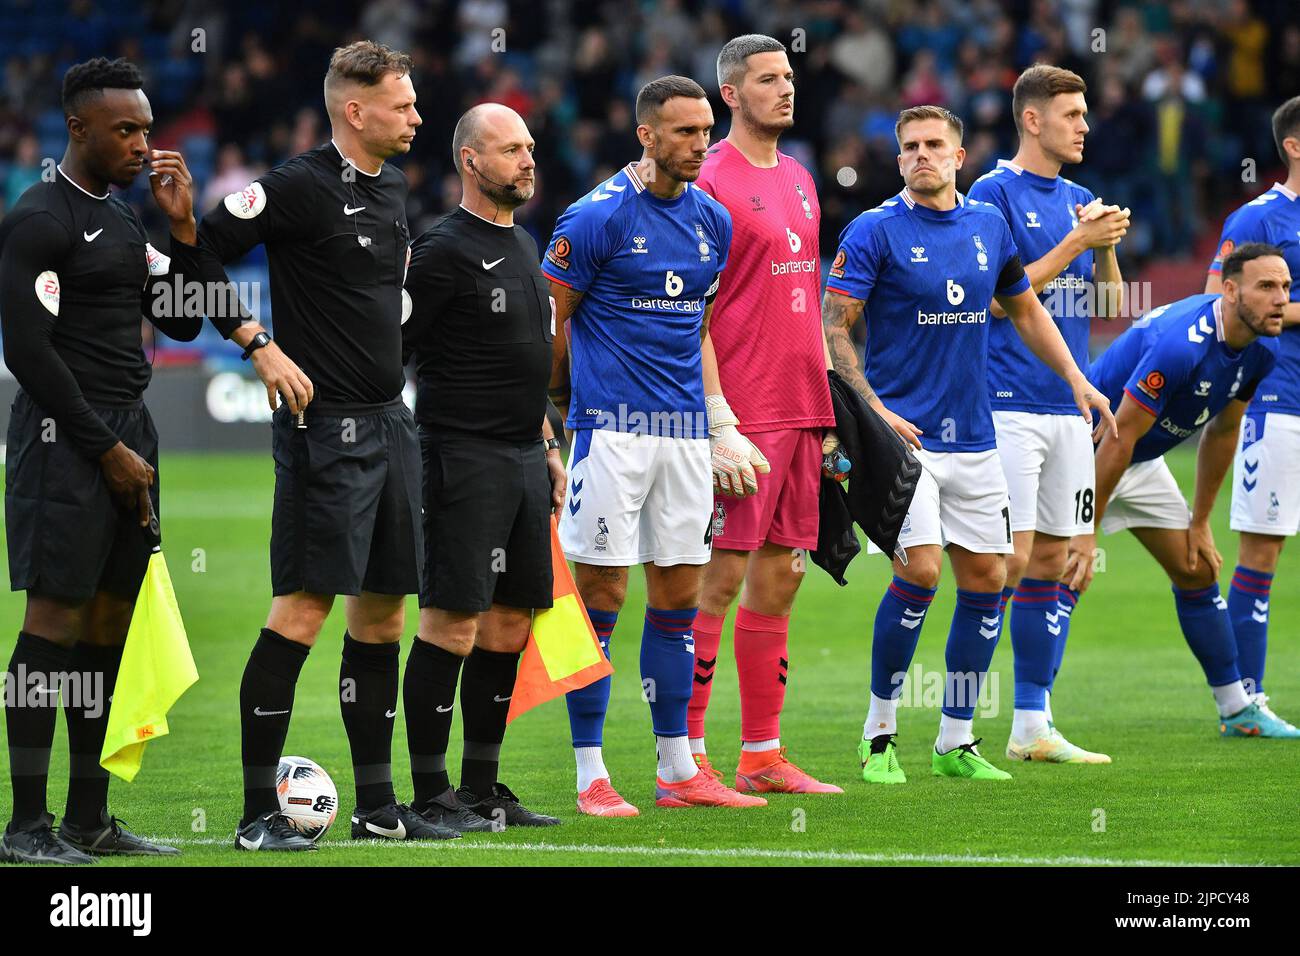 Liam Hogan (Captain) of Oldham Athletic before the Vanarama National League match between Oldham Athletic and Wealdstone at Boundary Park, Oldham on Wednesday 17th August 2022. (Credit: Eddie Garvey | MI News) Credit: MI News & Sport /Alamy Live News Stock Photo